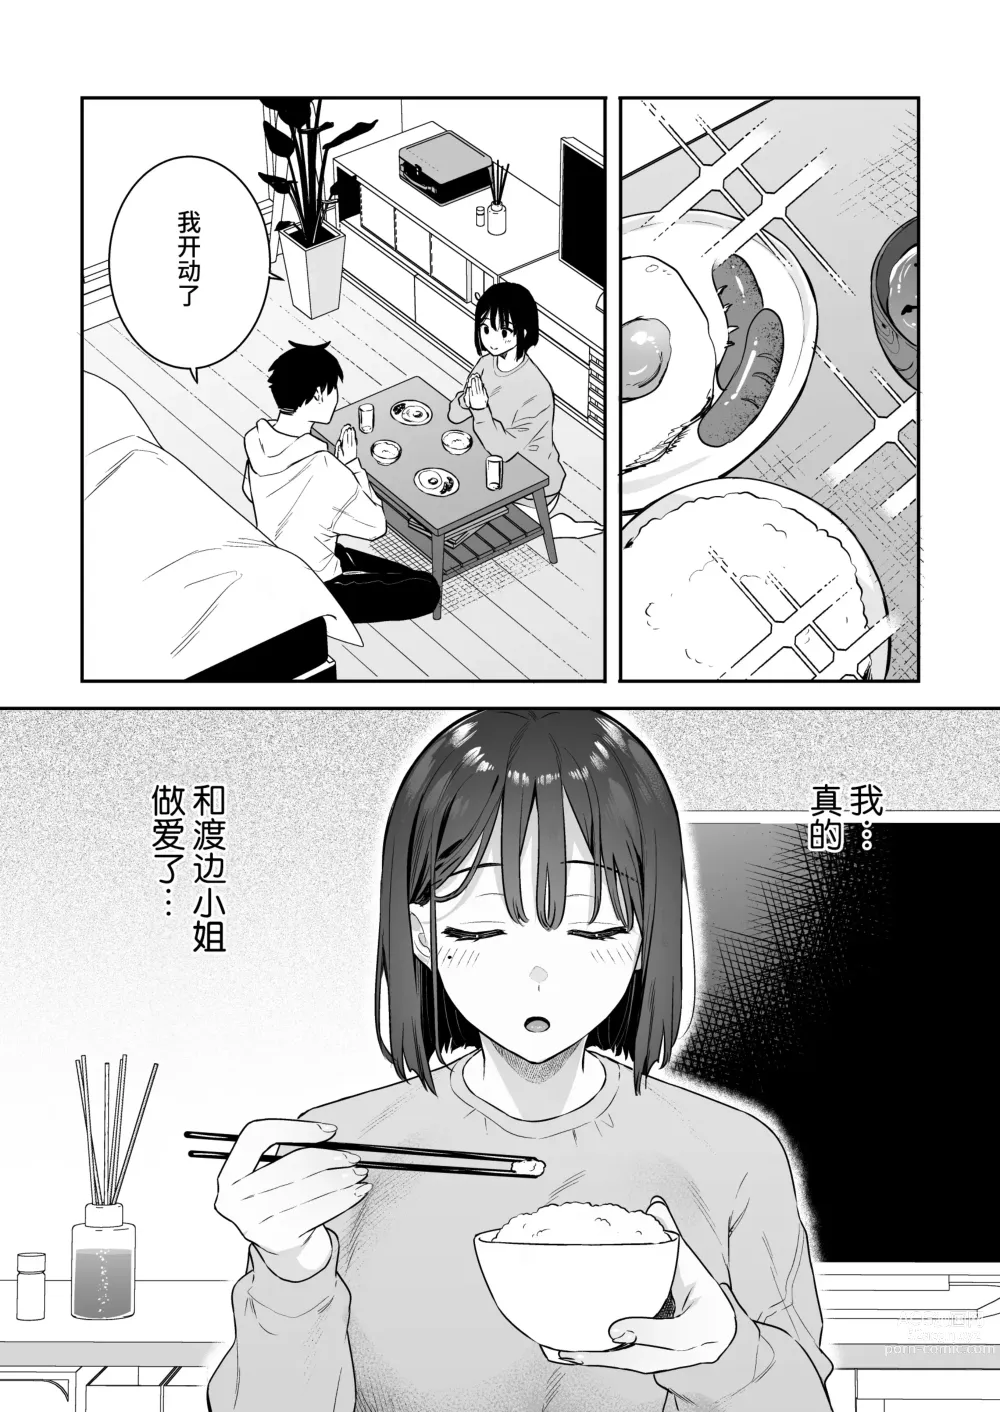 Page 36 of doujinshi 她的发情开关